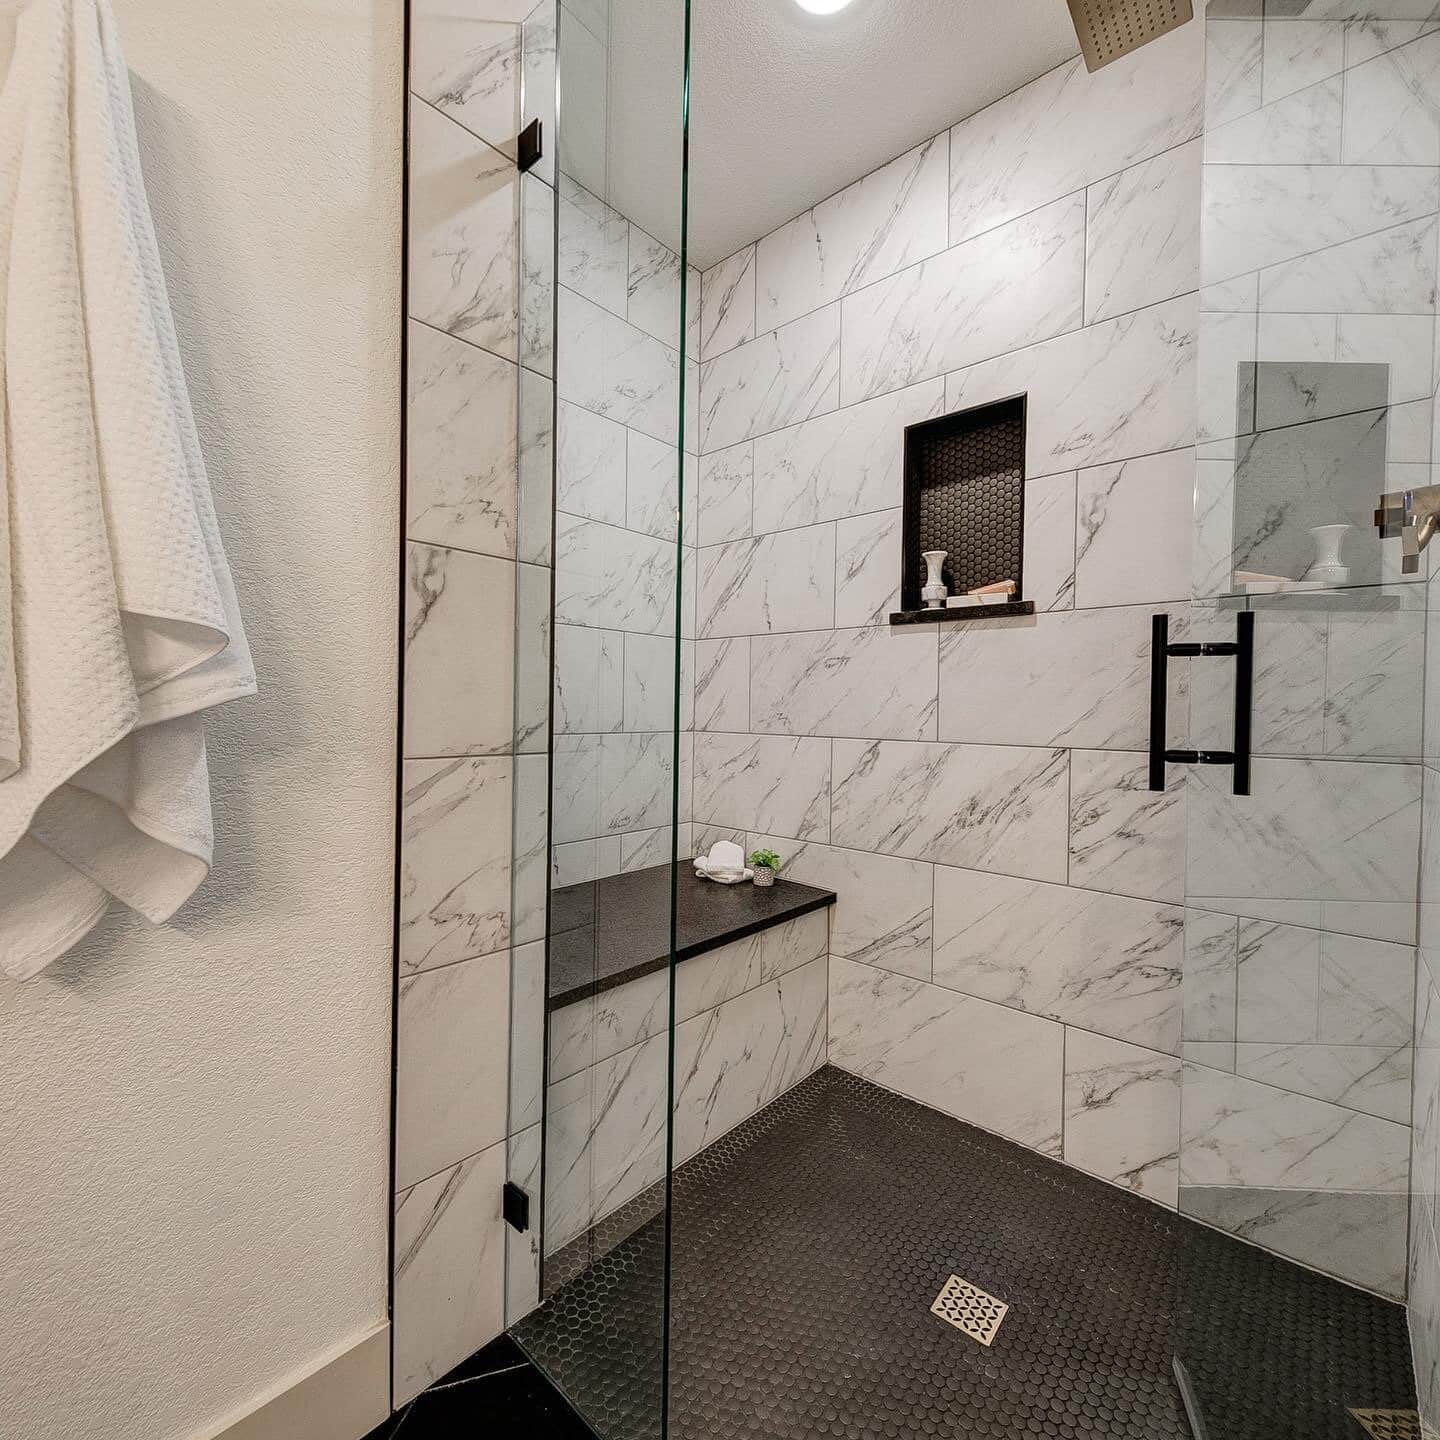 Large glassed-in shower with white marble tile walls and dark tile floor